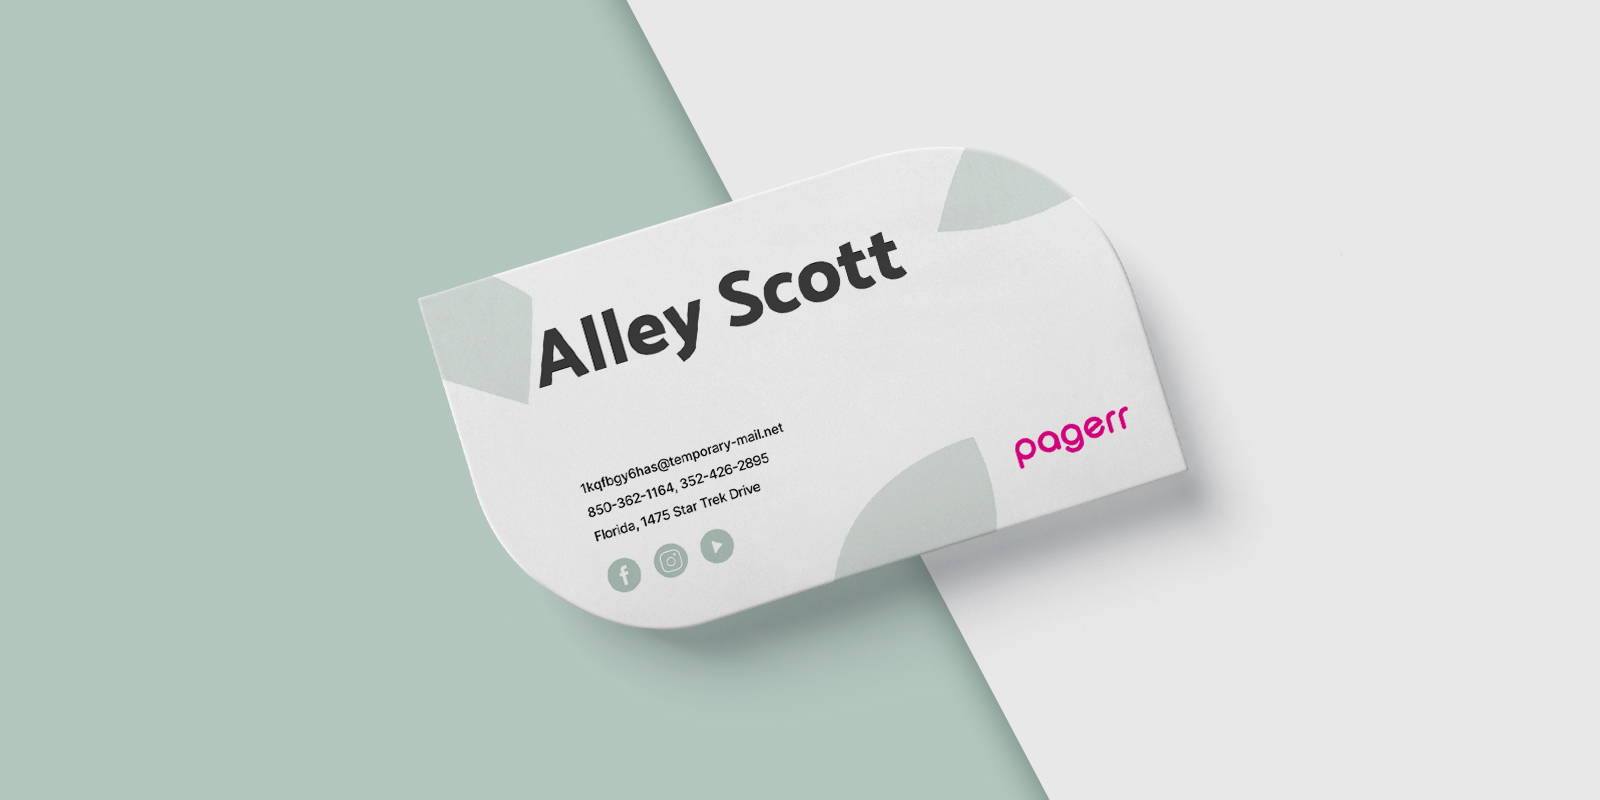 Special shape business cards in Barcelona - Print with Pagerr